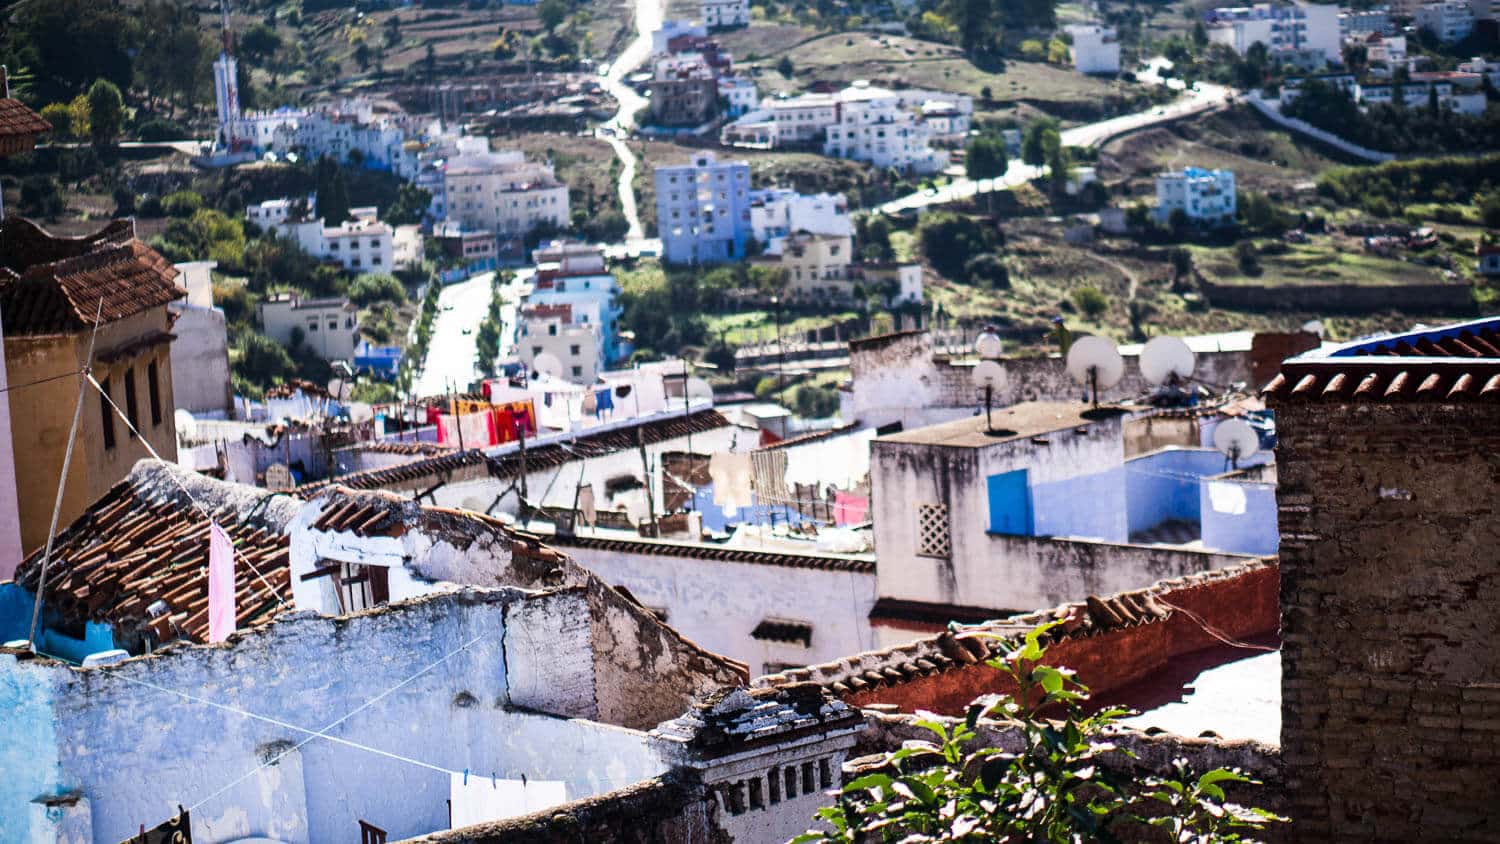 view over Chefchouen, Morocco's blue city